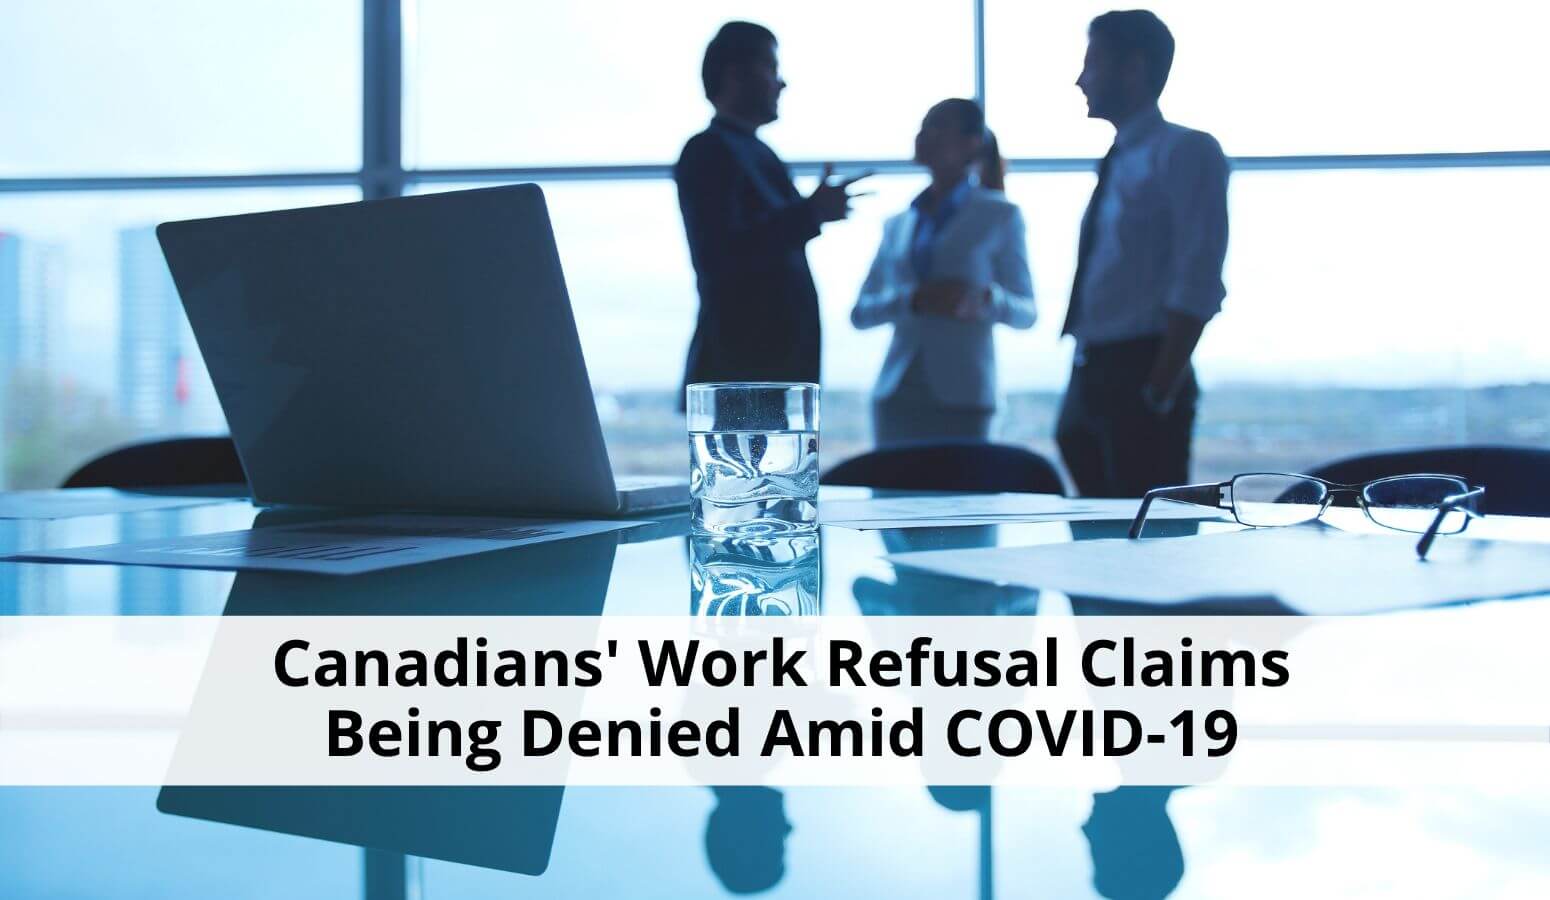 Featured image for “Majority of Canadians’ Work Refusal Claims Being Denied Amid COVID-19”